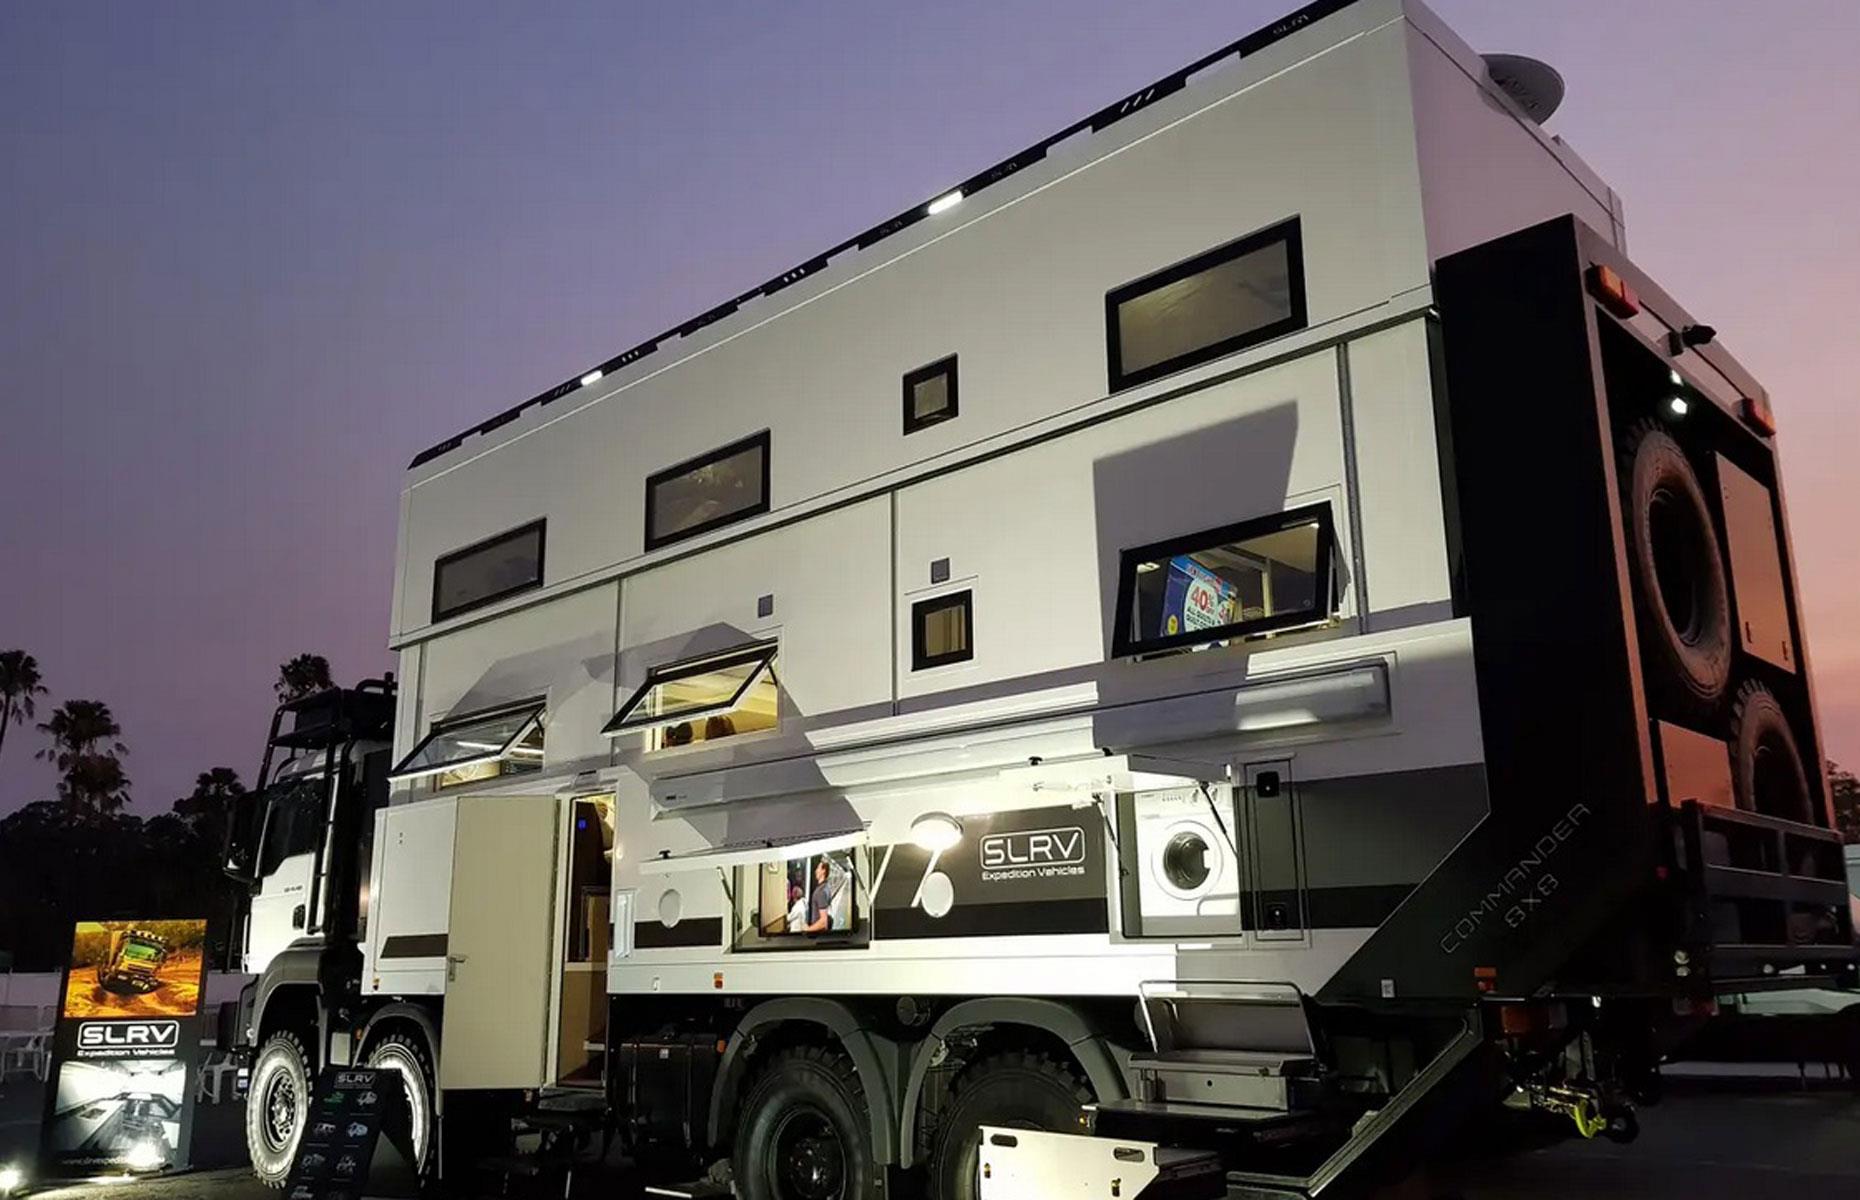 <p>A family of eight planning an epic adventure exploring Australia's remotest areas ended up commissioning this mammoth motorhome from Gold Coast firm <a href="https://slrvexpedition.com.au/">SLRV Expedition Vehicles</a> in 2017.</p>  <p>The luxury RV maker had a challenge on its hands creating an extra-large high-end motorhome that could cut it in the Australian Outback, where the terrain can be treacherous and weather can range from blistering heat to dust storms and cyclones.</p>